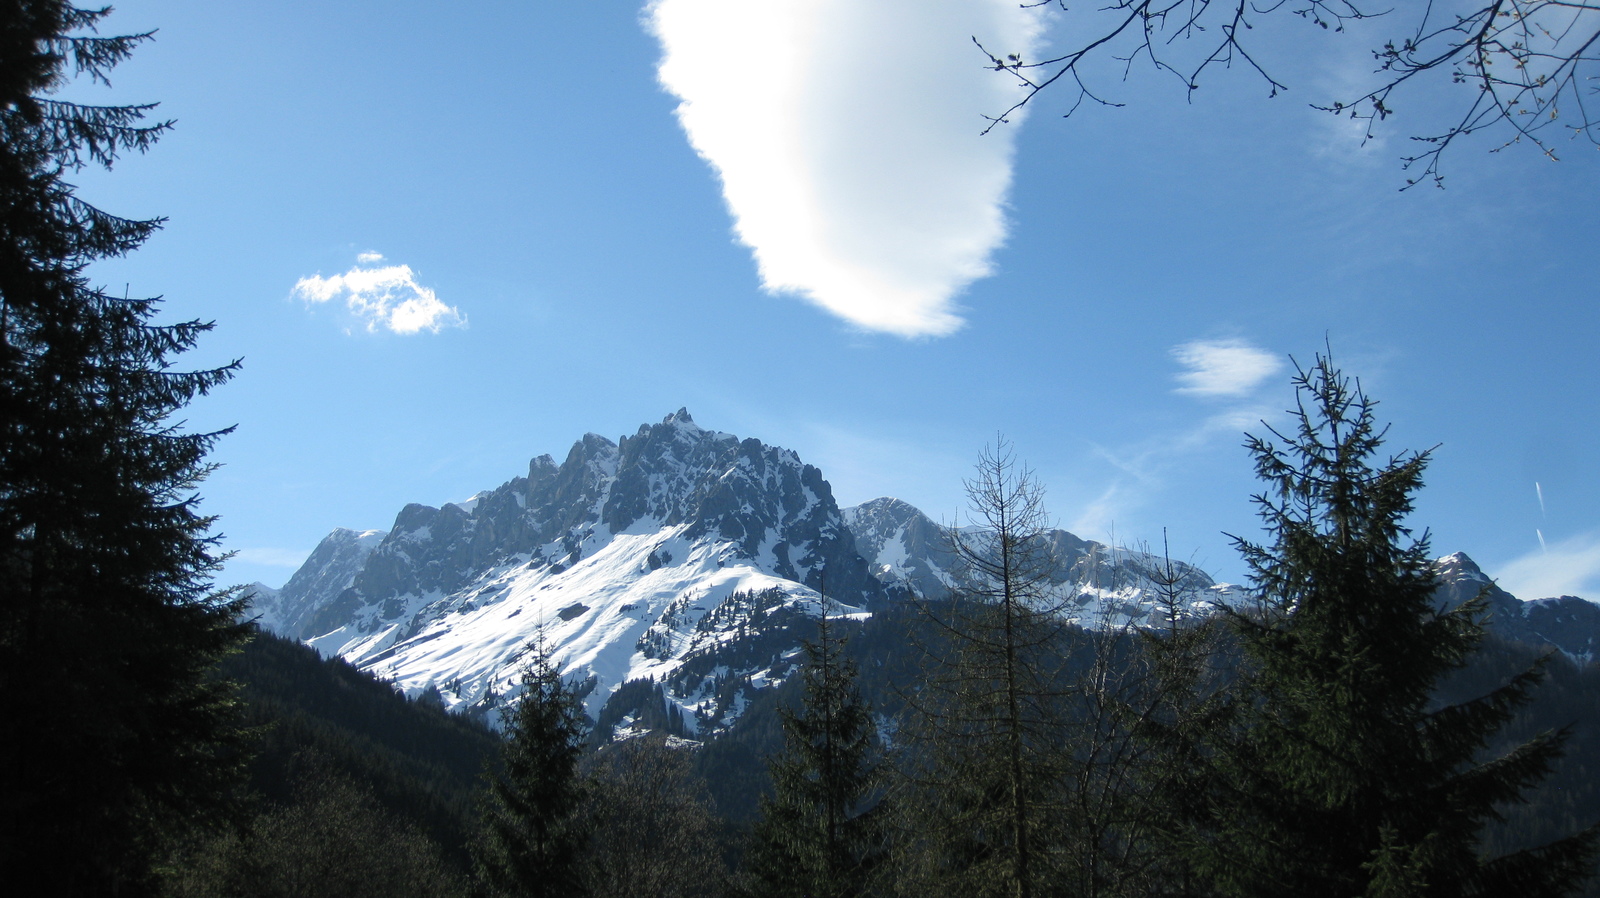 Hochkönig at the UNESCO Geopark Ore of the Alps